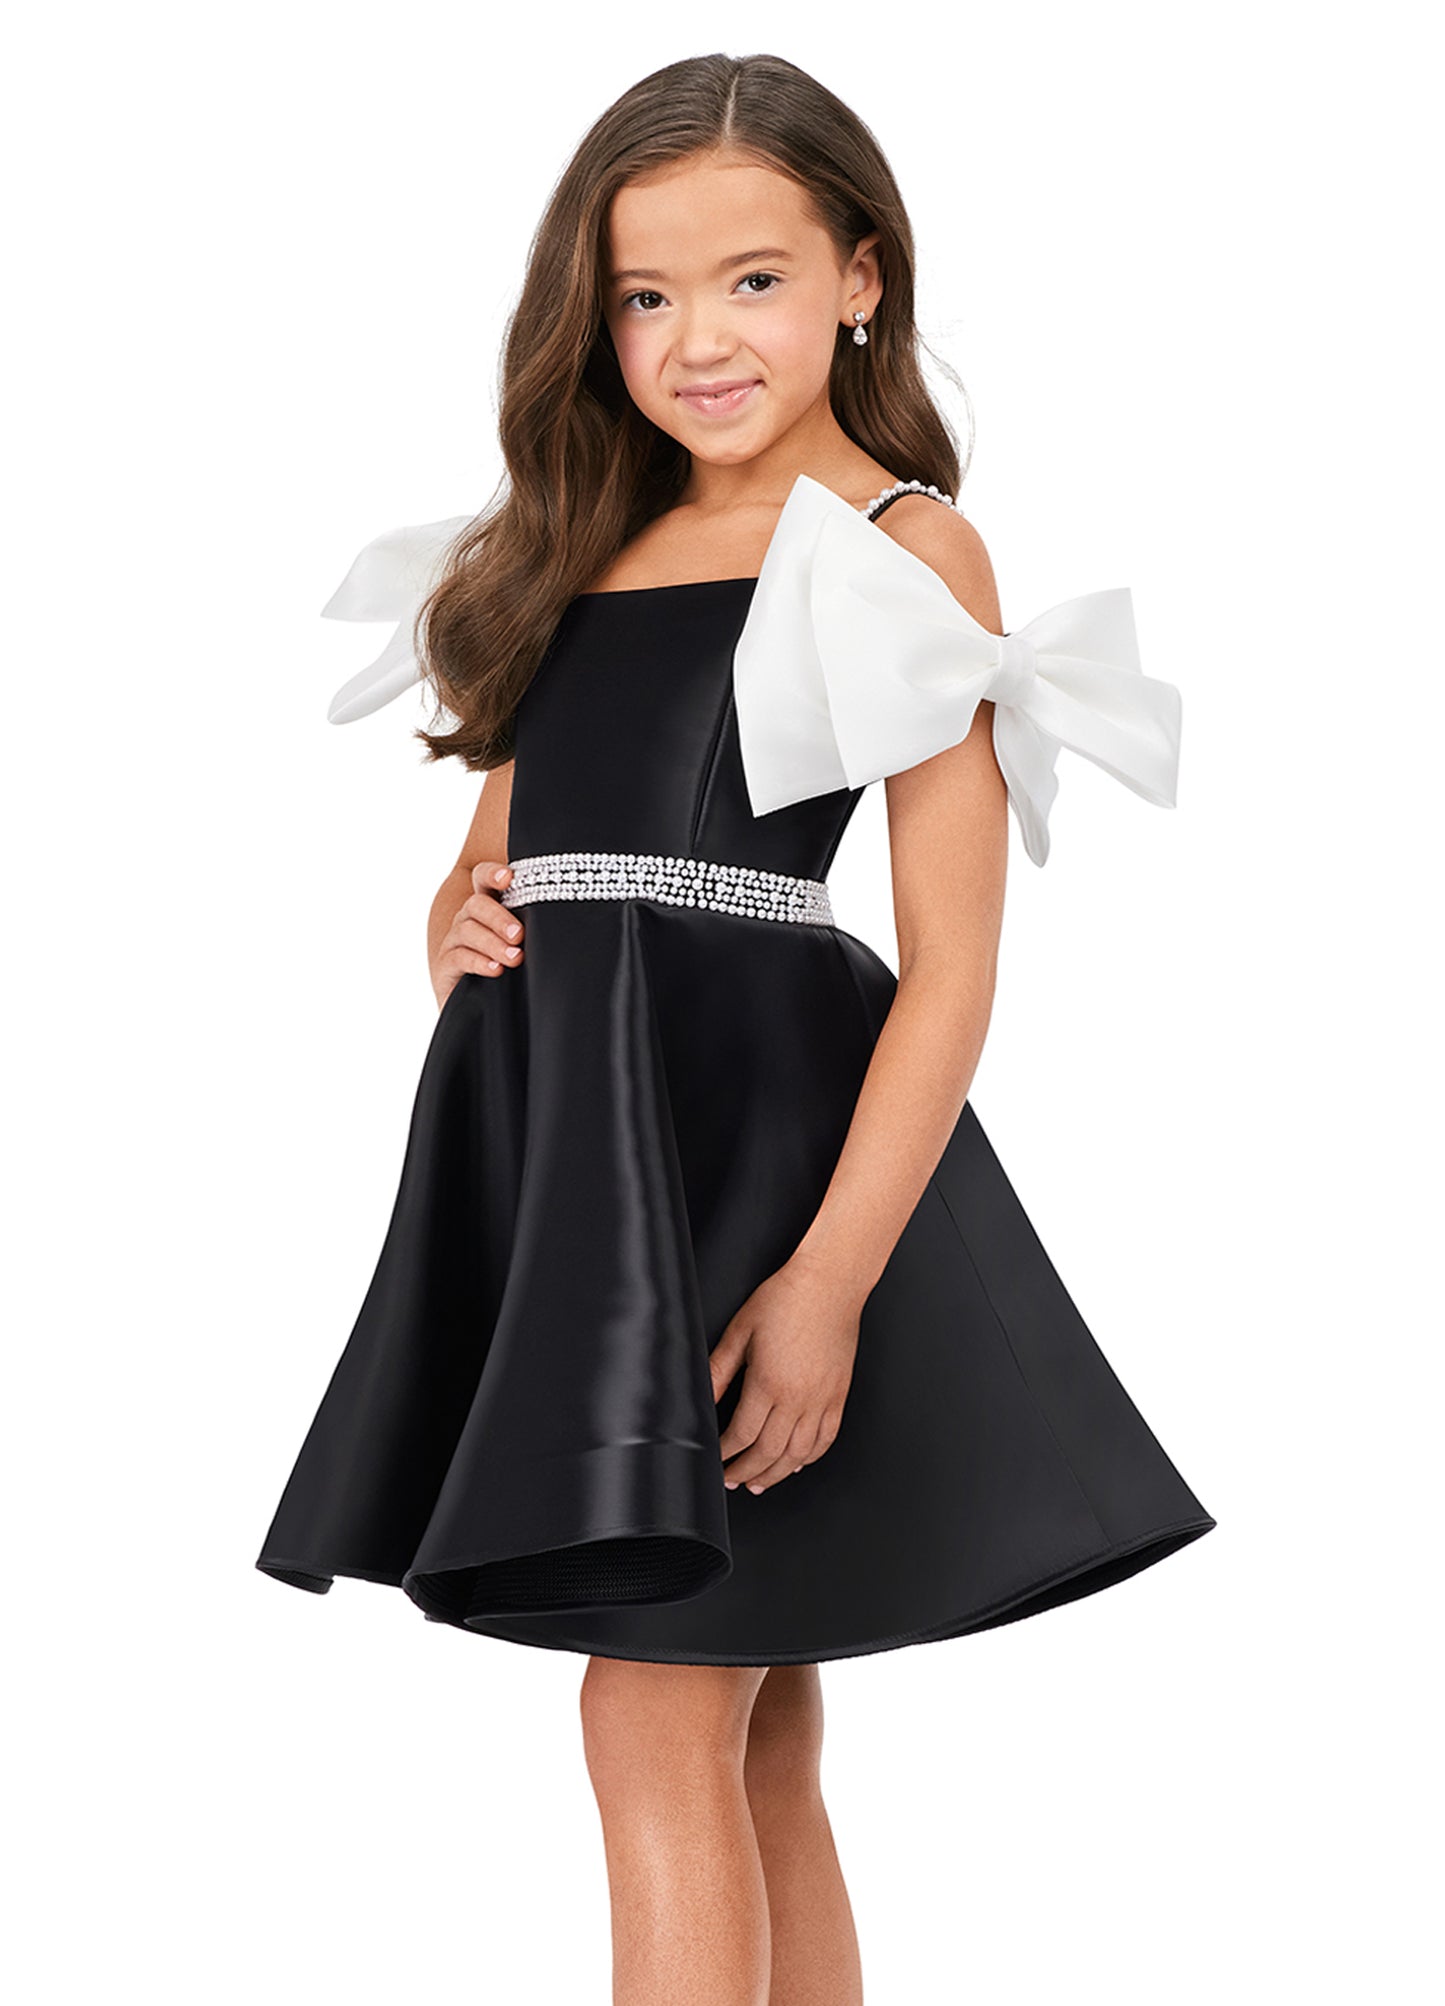 Ashley Lauren Kids 8223 Off The Shoulder With Bows A-Line Beaded Belt Detail Phantom Satin Coctail Dress. Cuteness overload in this fun satin dress! With its beautiful pearl belt and bow sleeves, this is a must for any little fashionista.